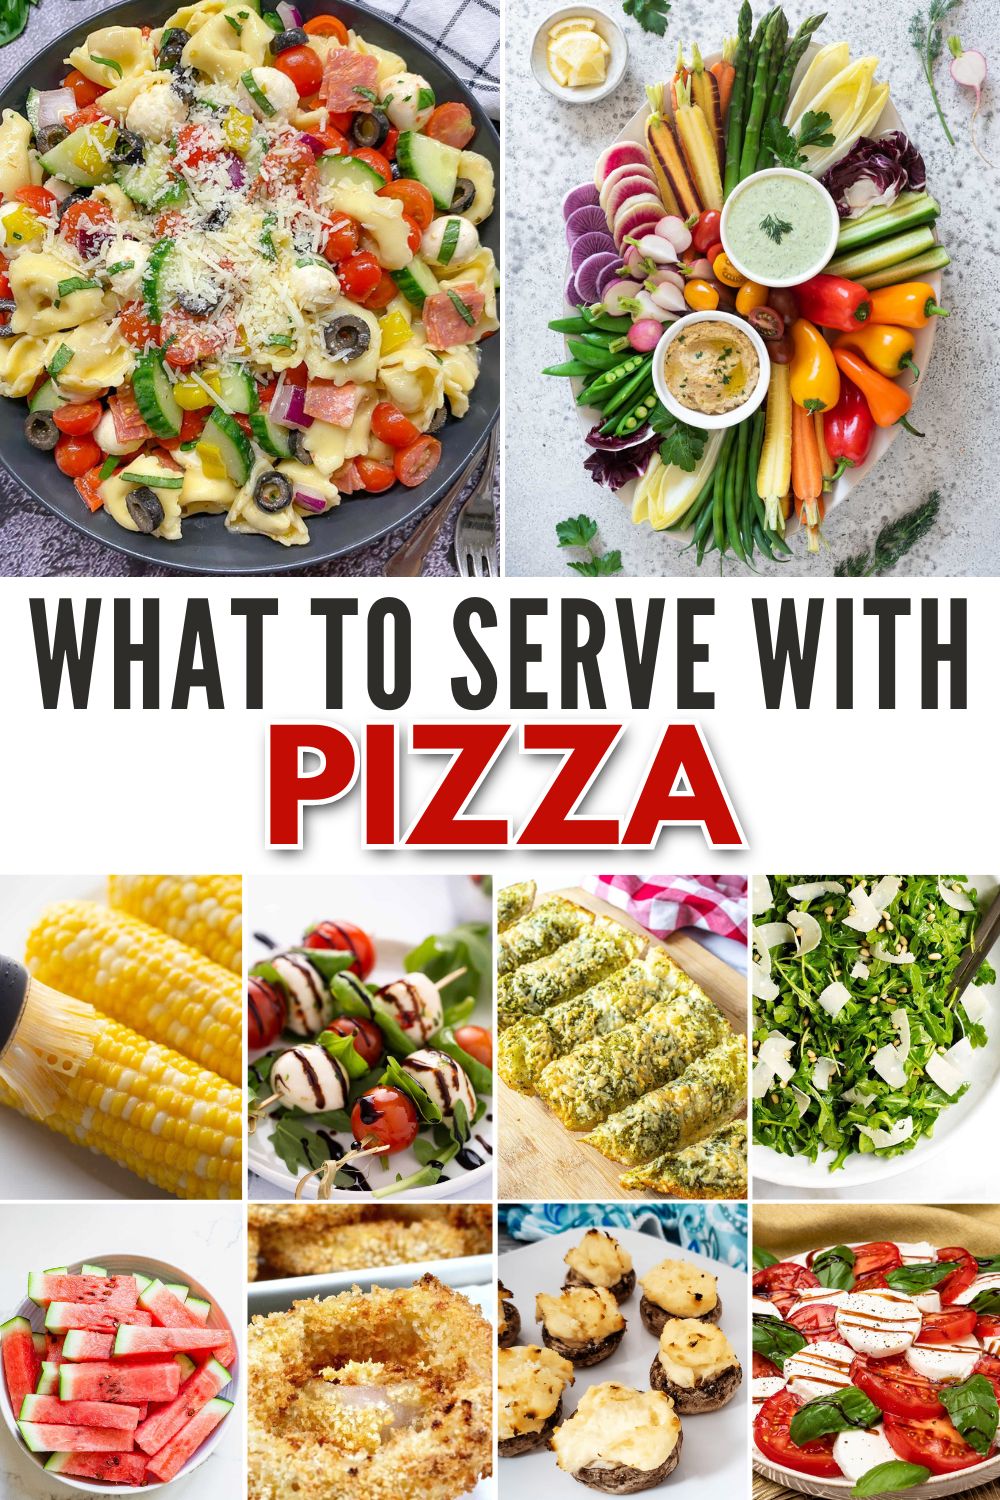 Pictures of side dishes with text title of "What to serve with pizza".